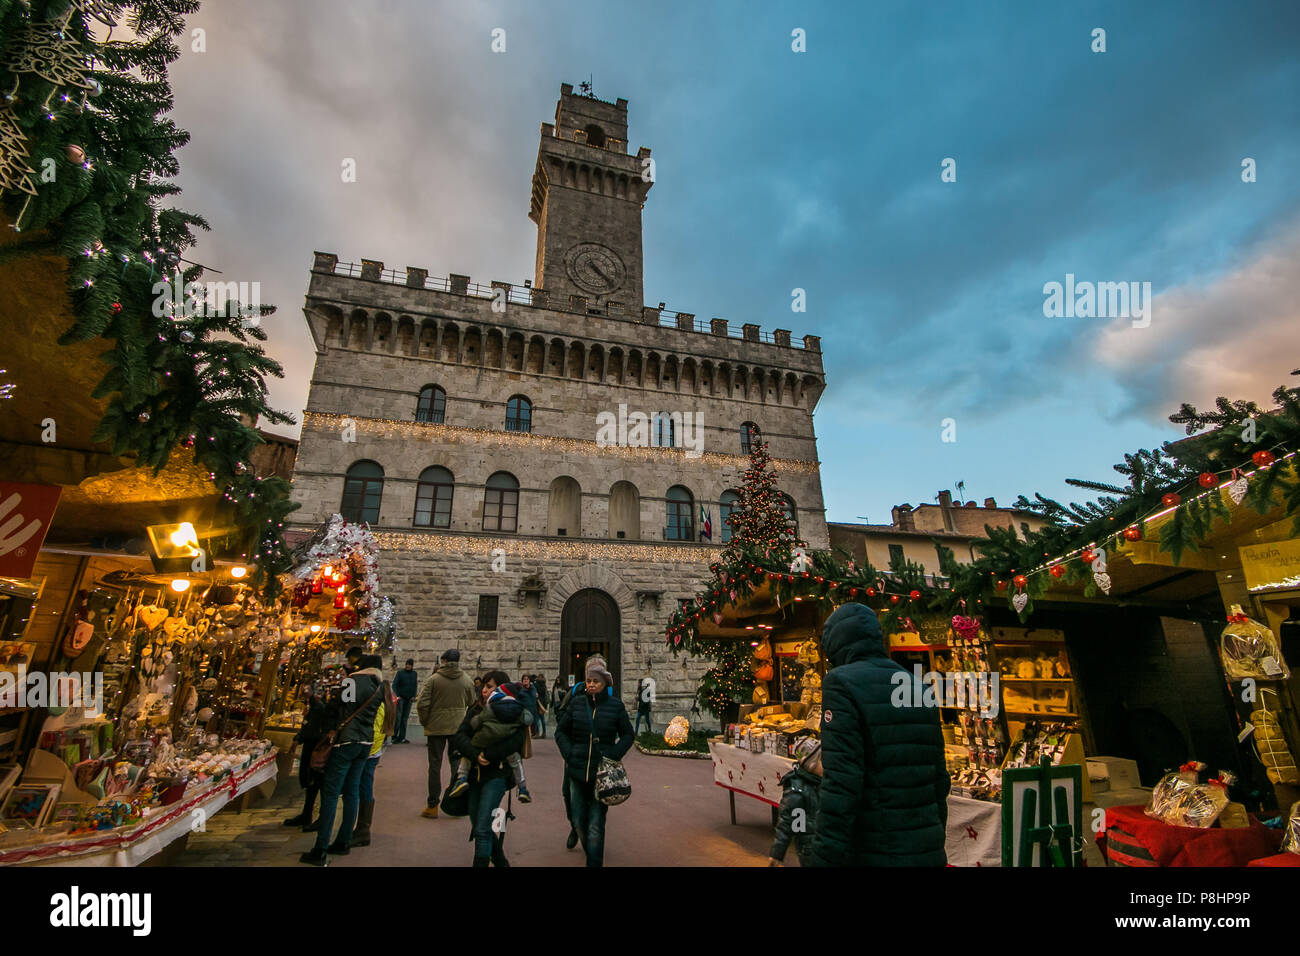 MONTEPULCIANO, ITALY - NOVEMBER 18, 2017: Enchanted atmosphere at the Christmas market in the historic center of Montepulciano with big xmas tree, Tus Stock Photo